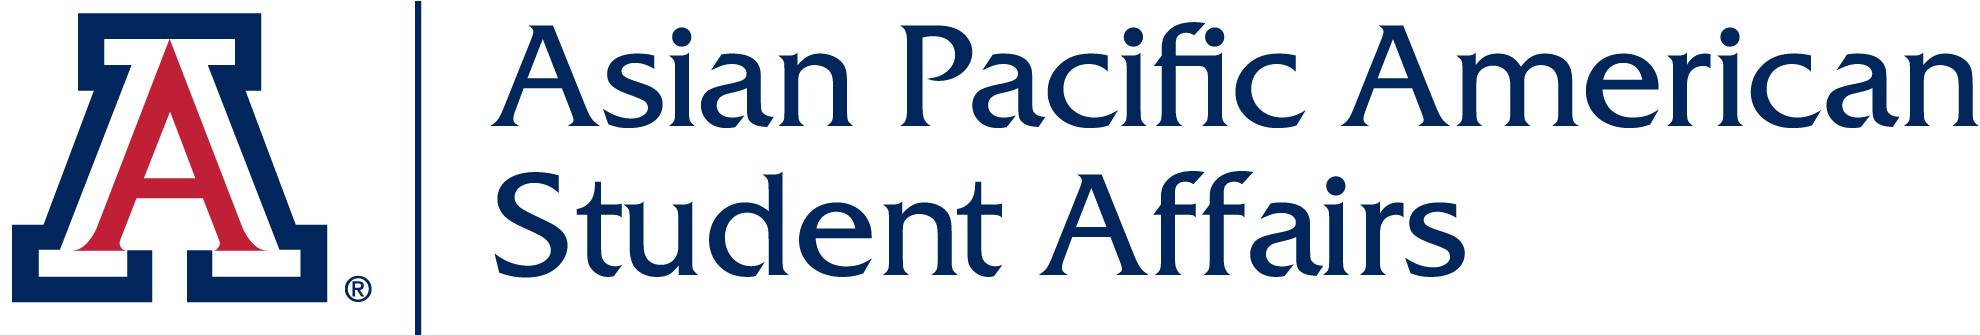 Asian Pacific American Student Affairs | Home